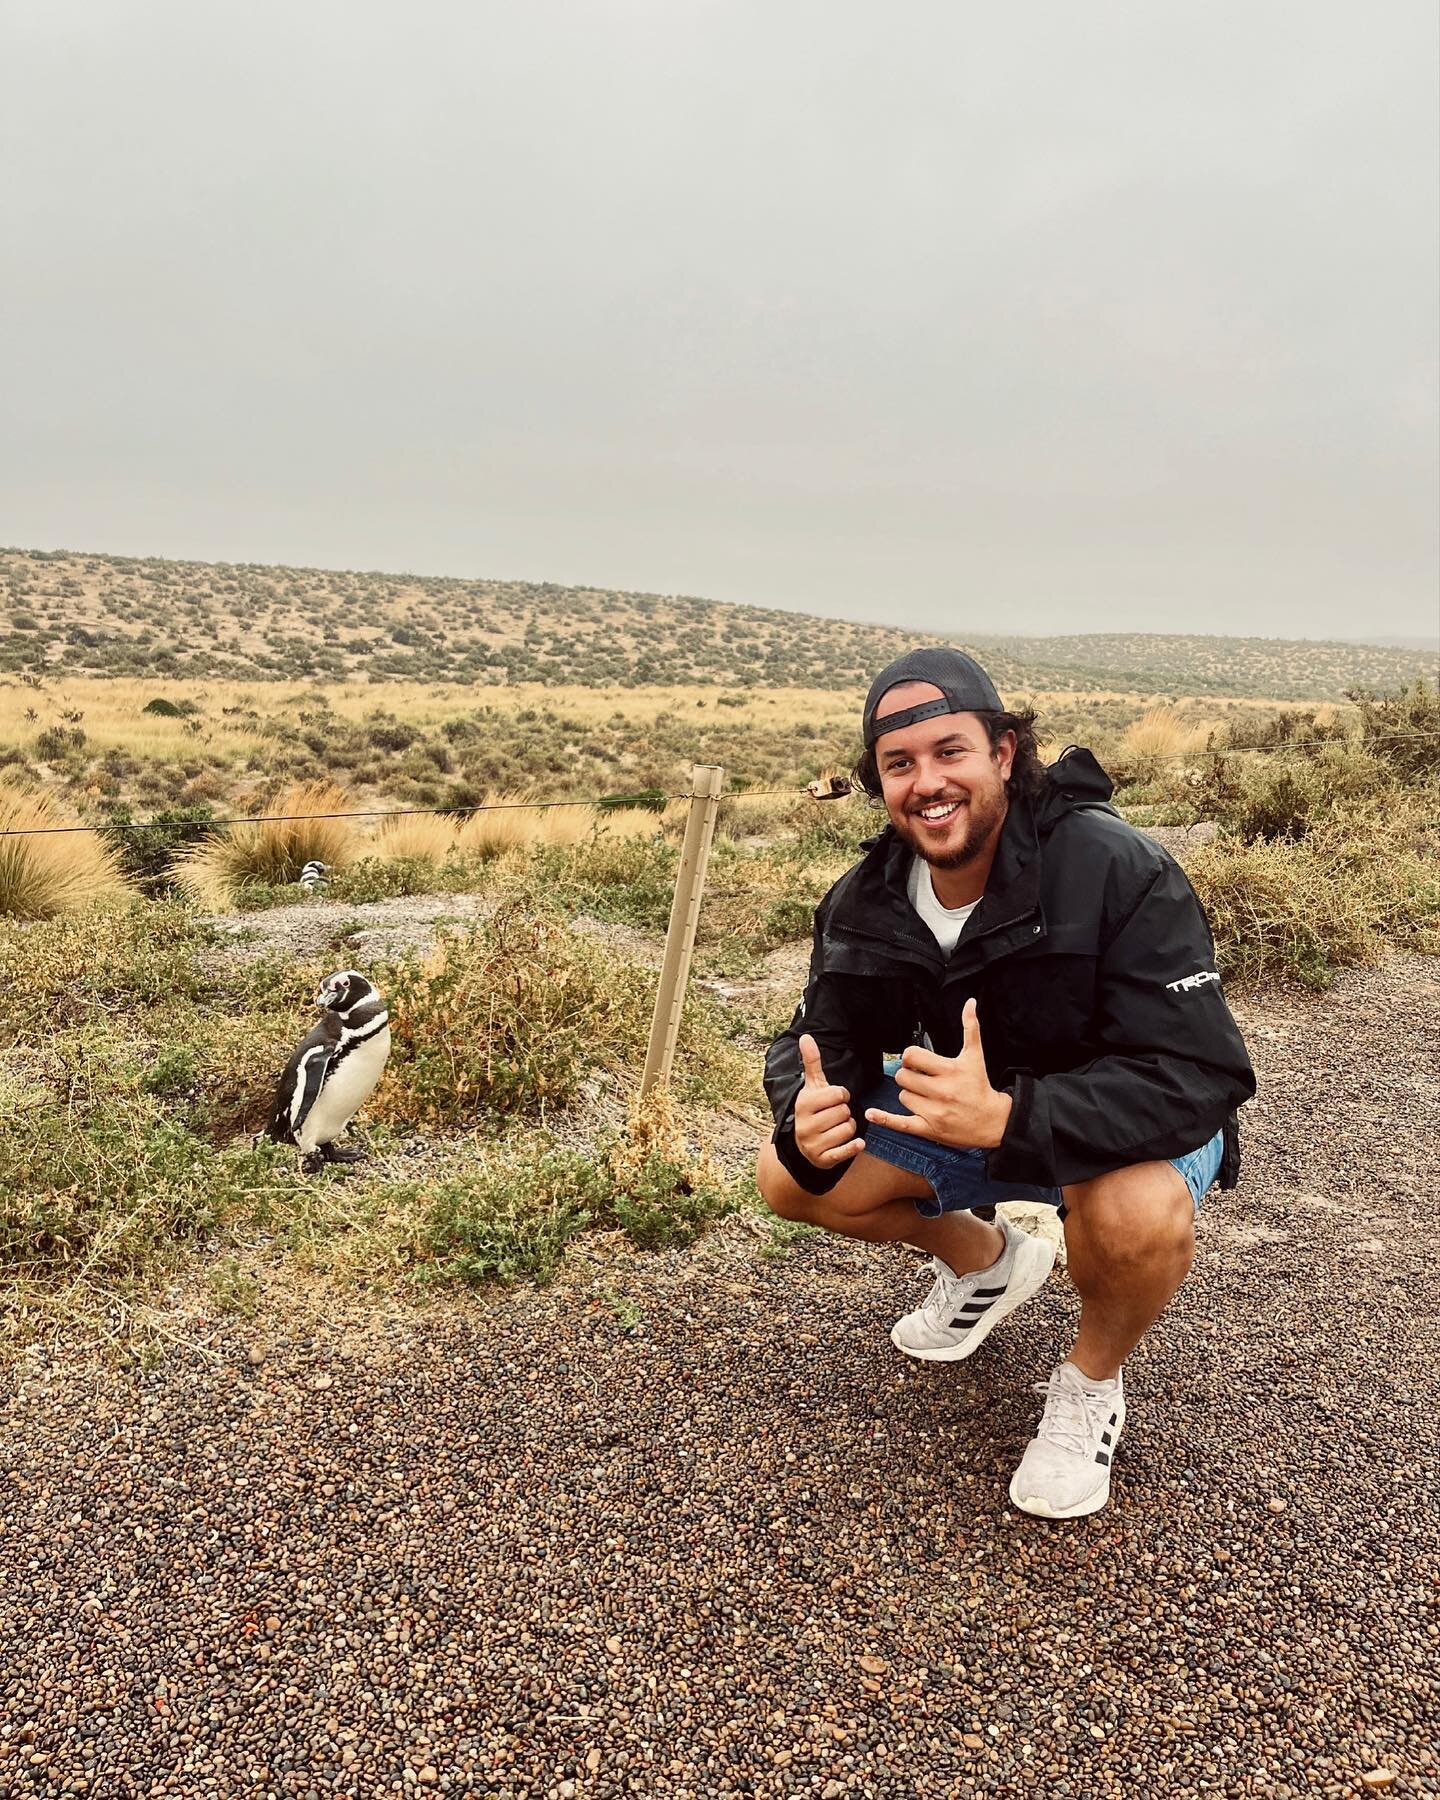 PENGUINS 🐧🥰 One of our final must-sees of our trip was to visit the Magellanic penguin colony at Punta Tombo. Almost 140k penguins live in the colony. This time of year, the babies are almost fully grown, but most were still fluffy! The mom and dad